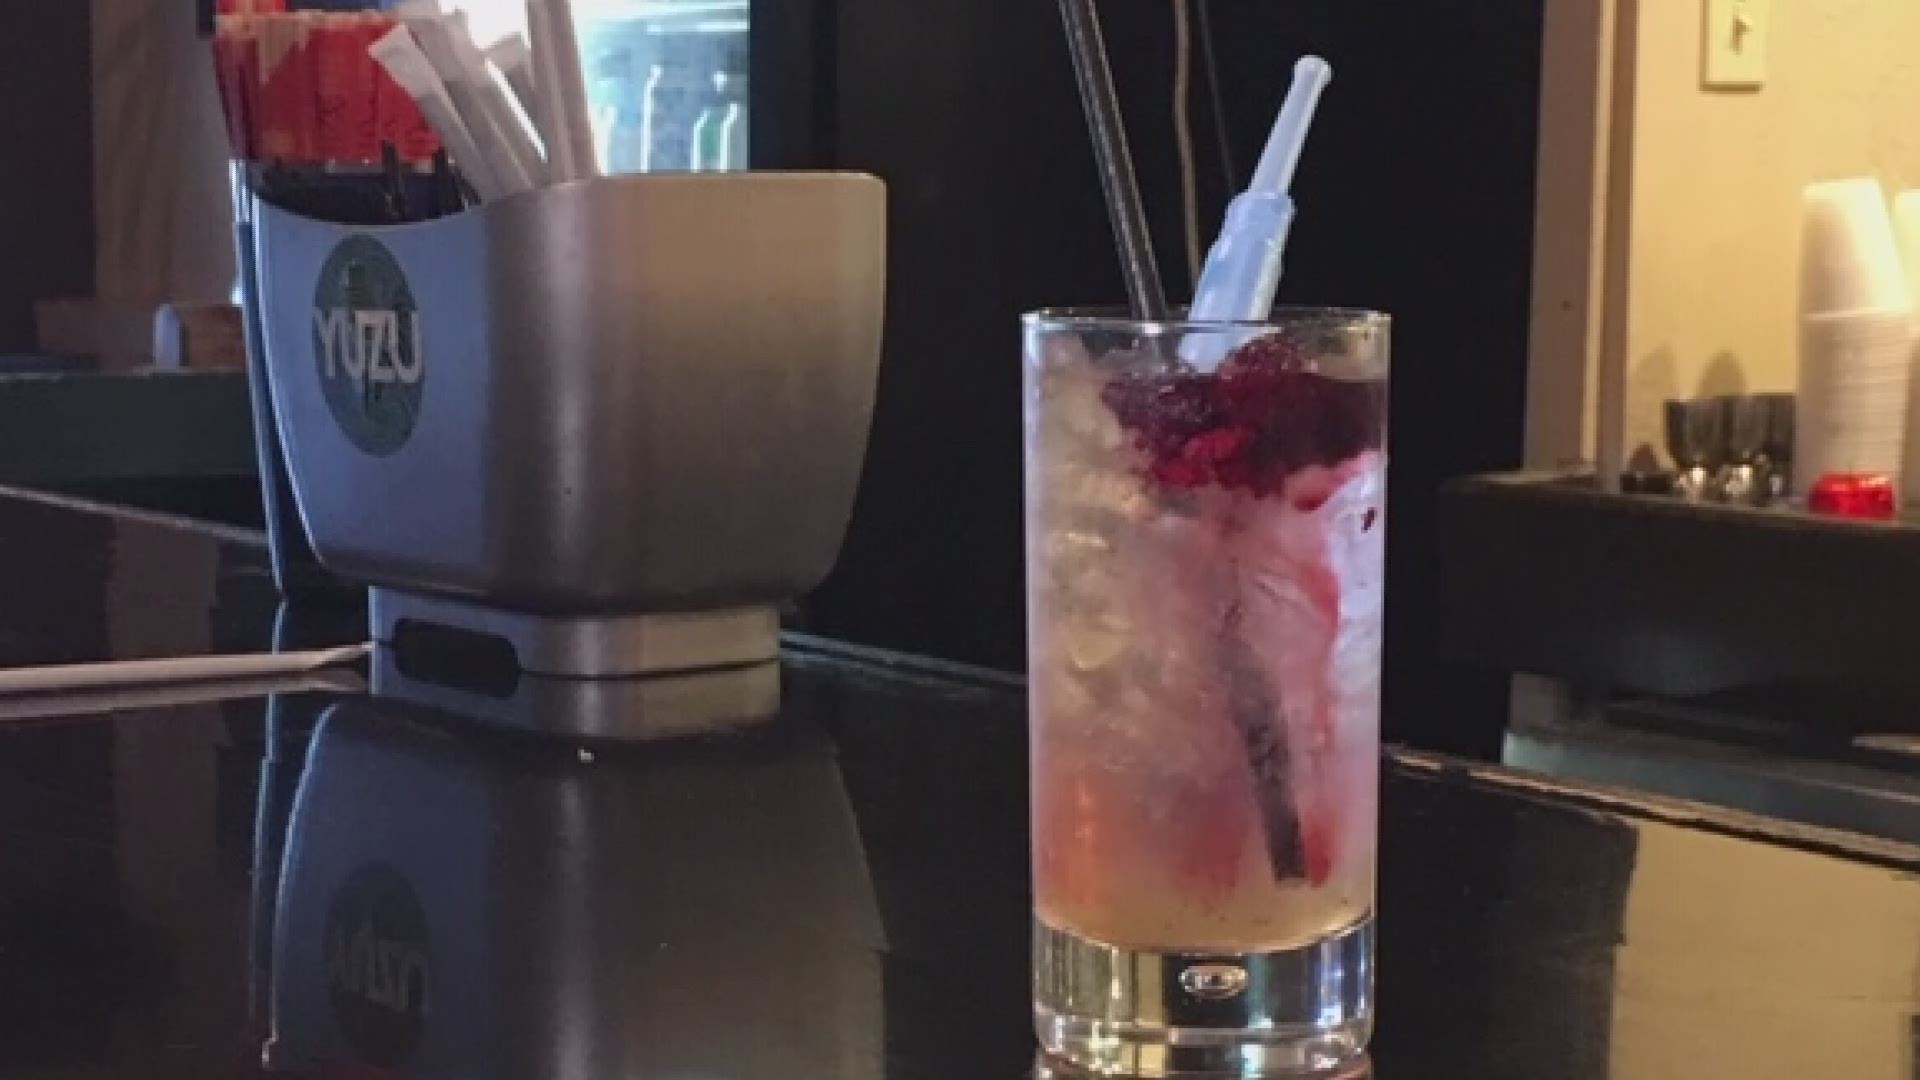 Controversy stirred up over drink garnish fundraiser in Lakewood